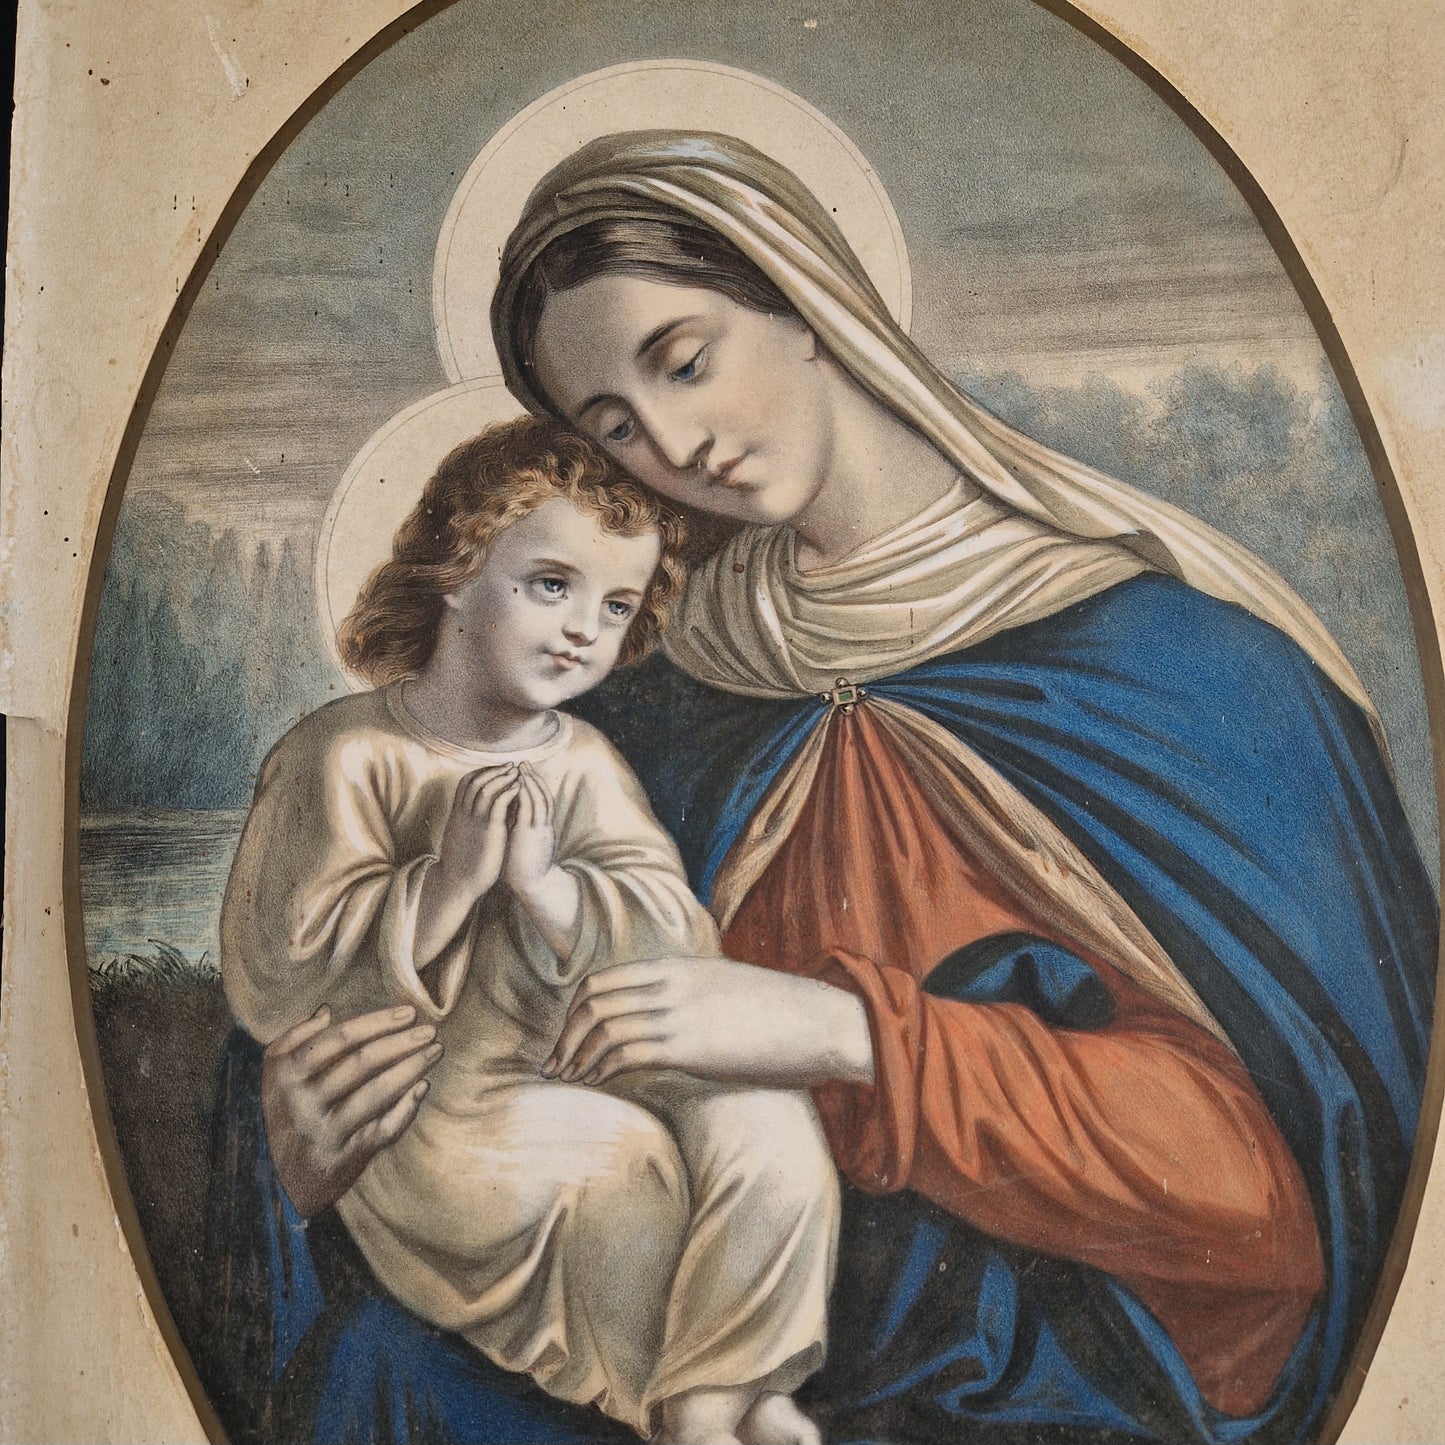 French vintage lithograph print of Madonna and child.